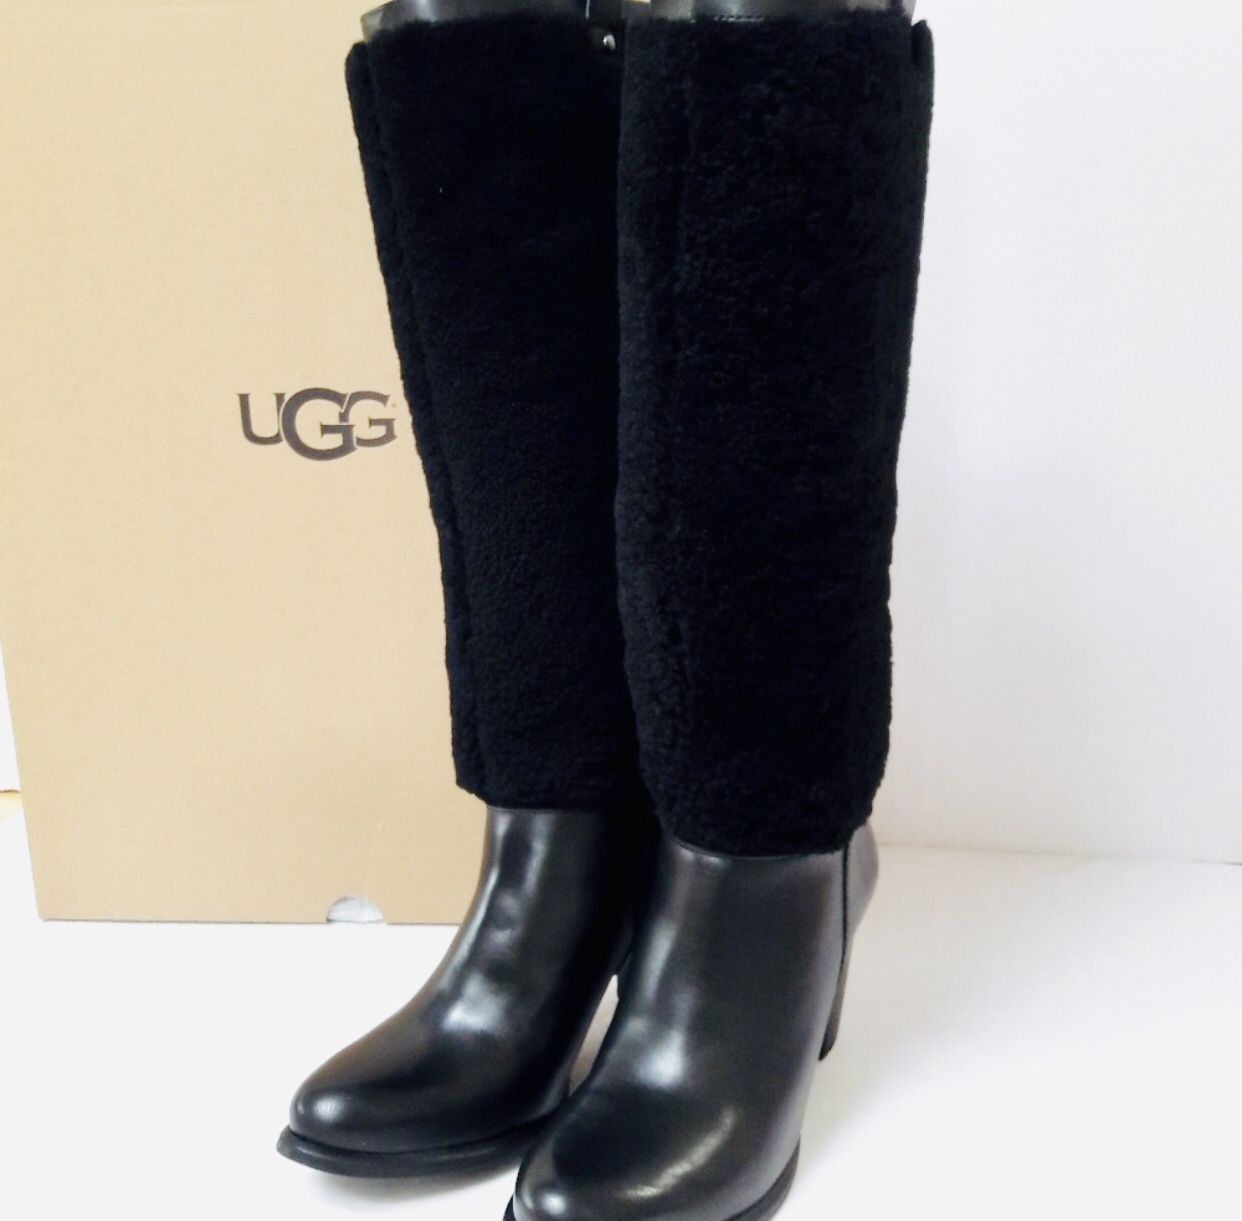 UGG Exposed Fur Boots Size 8.5